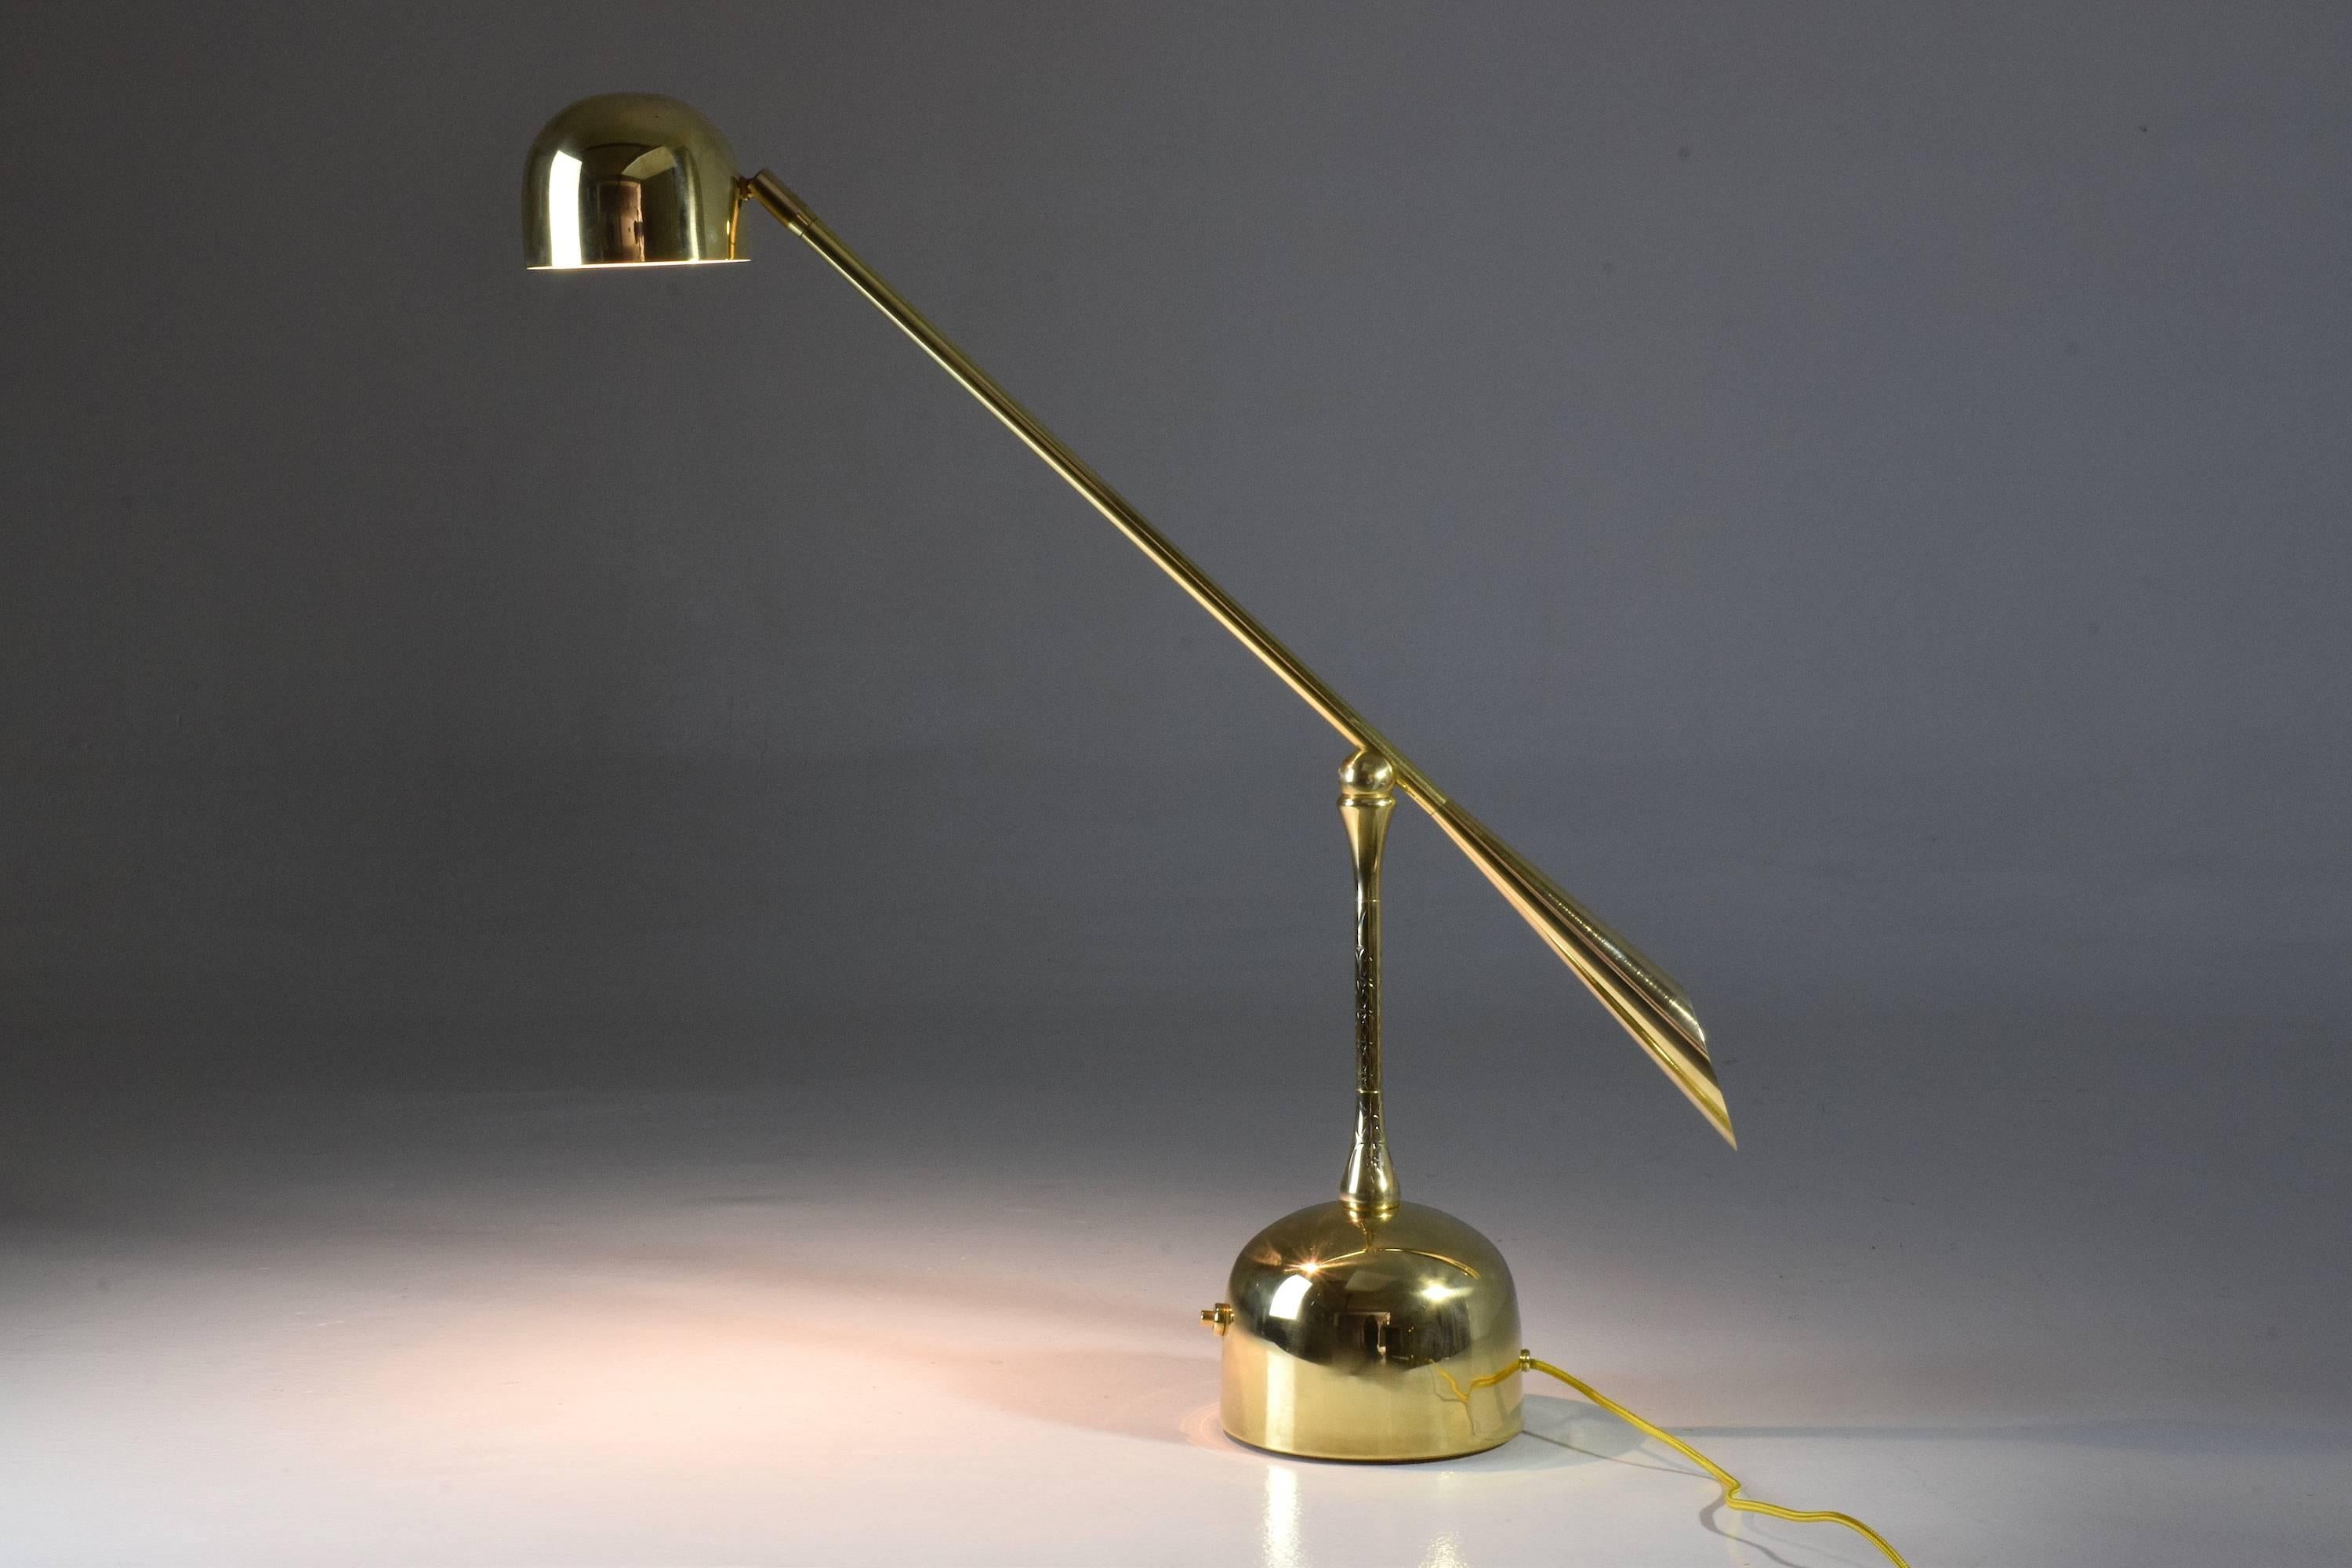 Continuum-II Contemporary Articulating Brass Table Lamp, Flow Collection (Poliert)